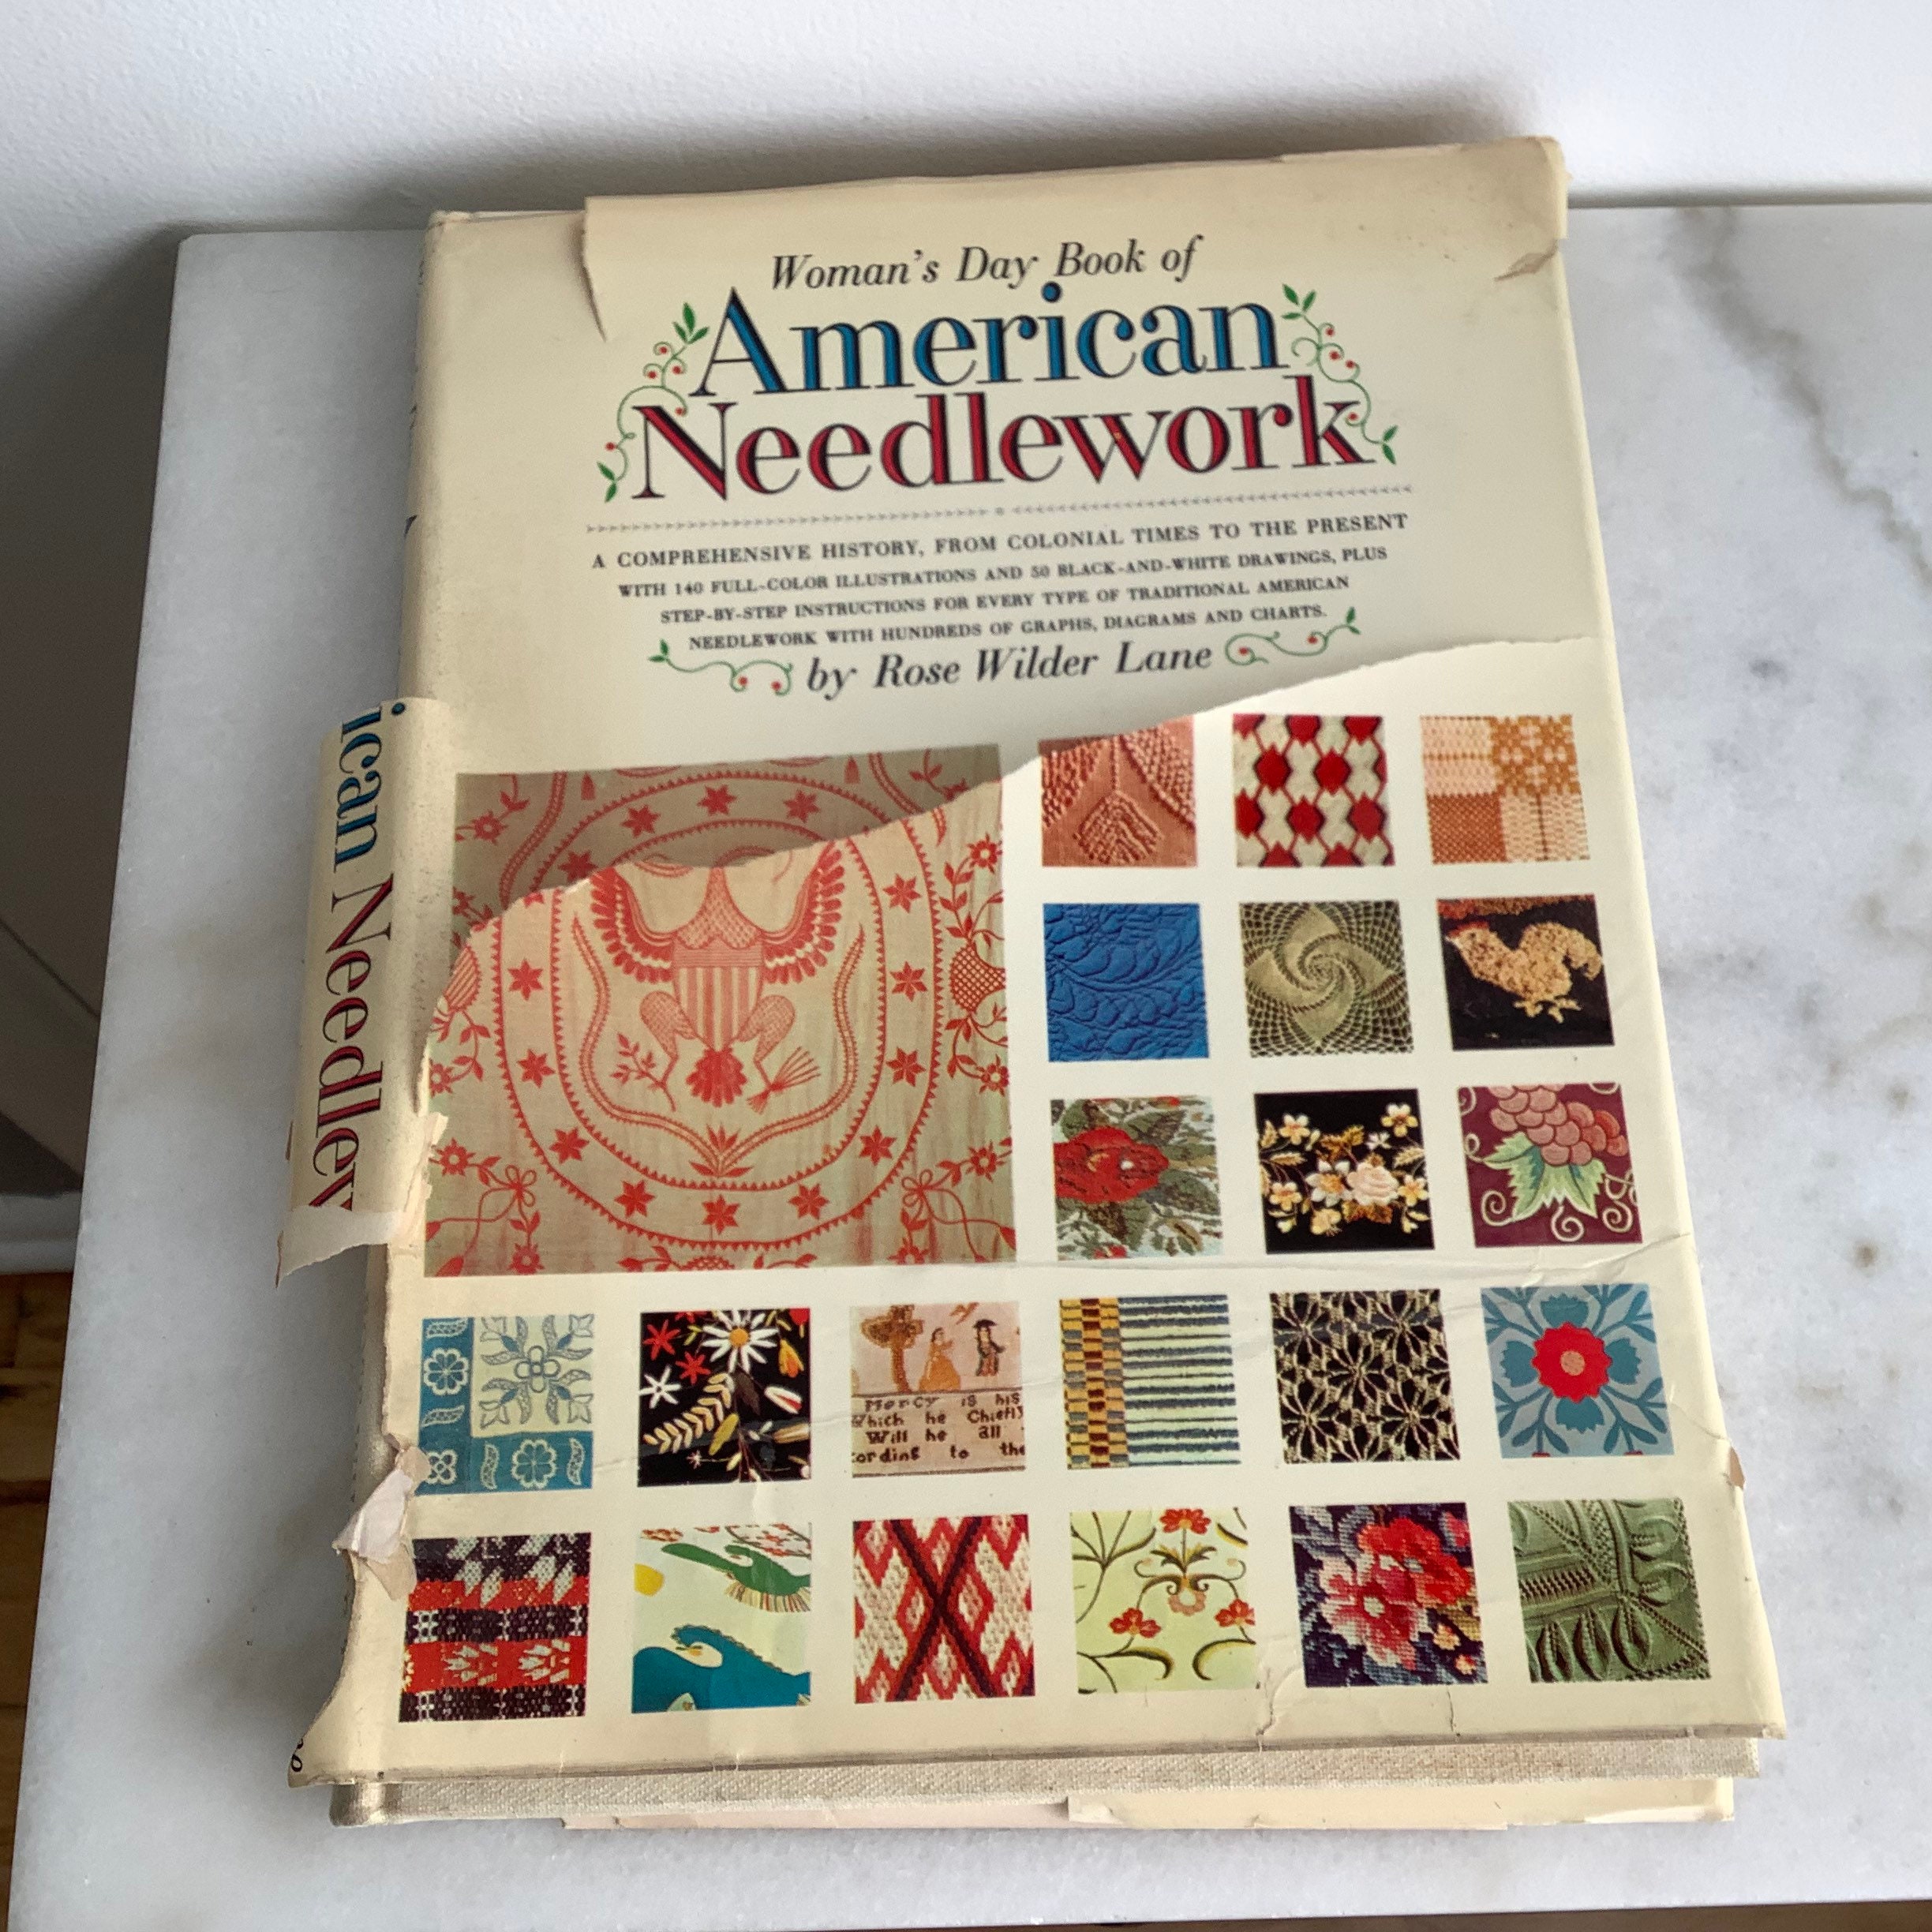 Woman's Day Book of American Needlework. A Comprehensive - Etsy